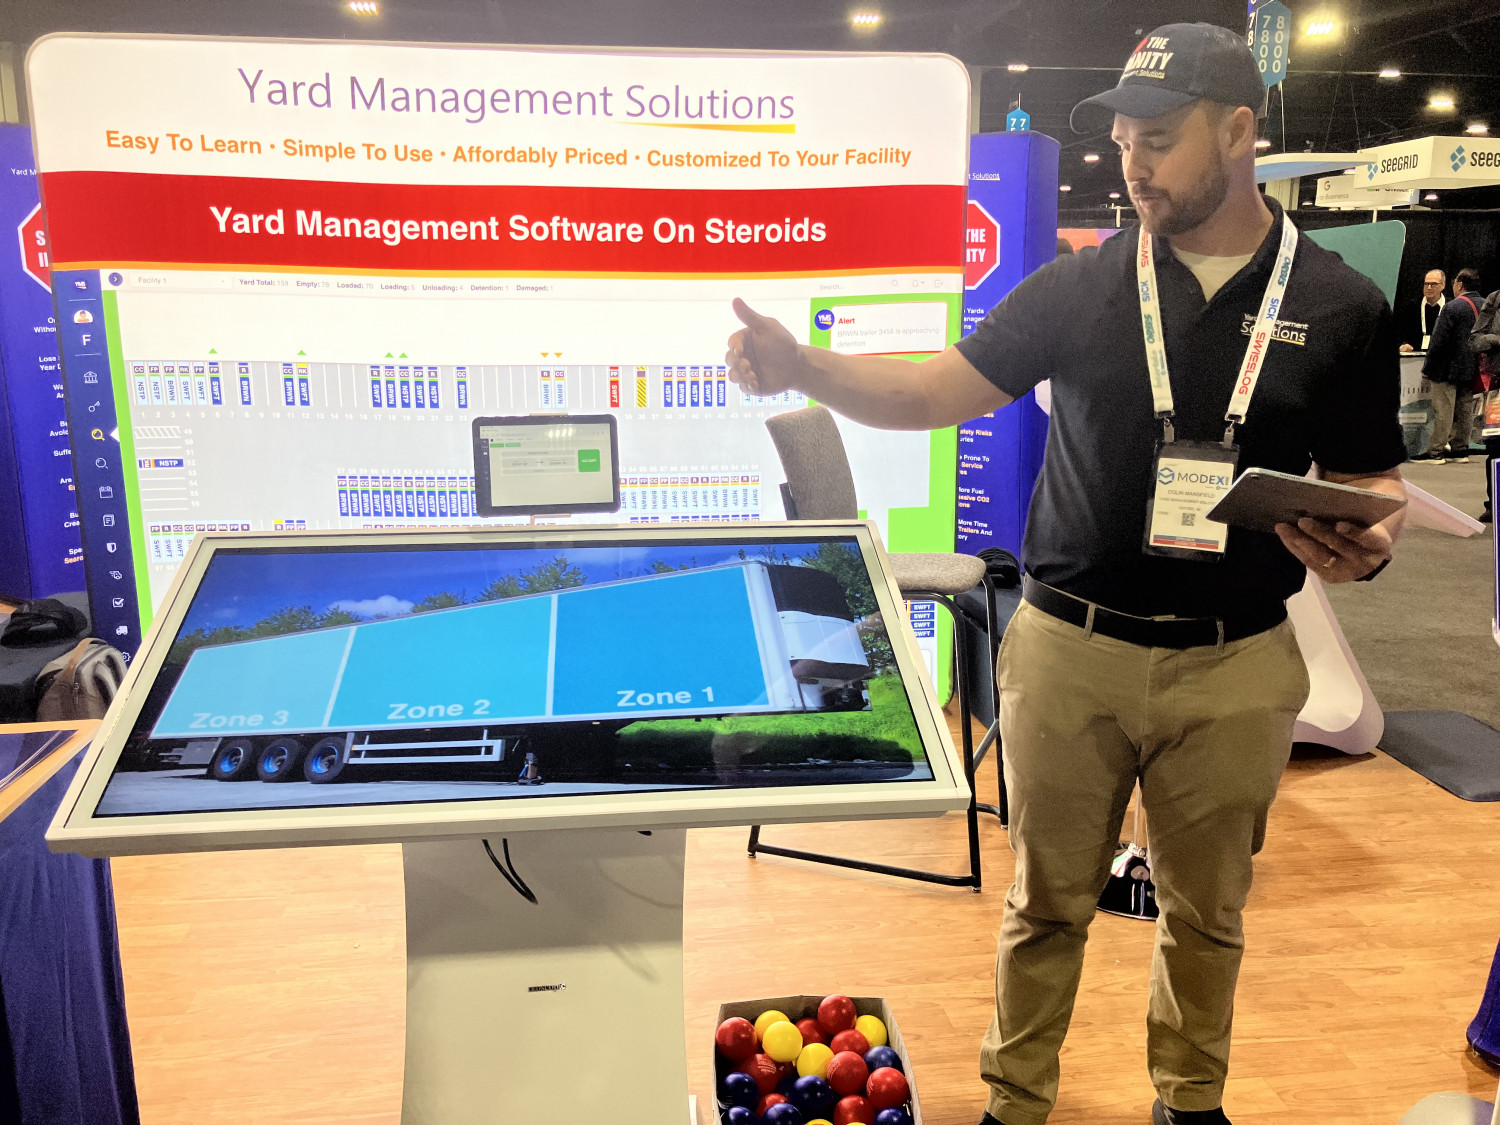 Vice president Colin Mansfield discusses Yard Management Solutions' software's most recent features.